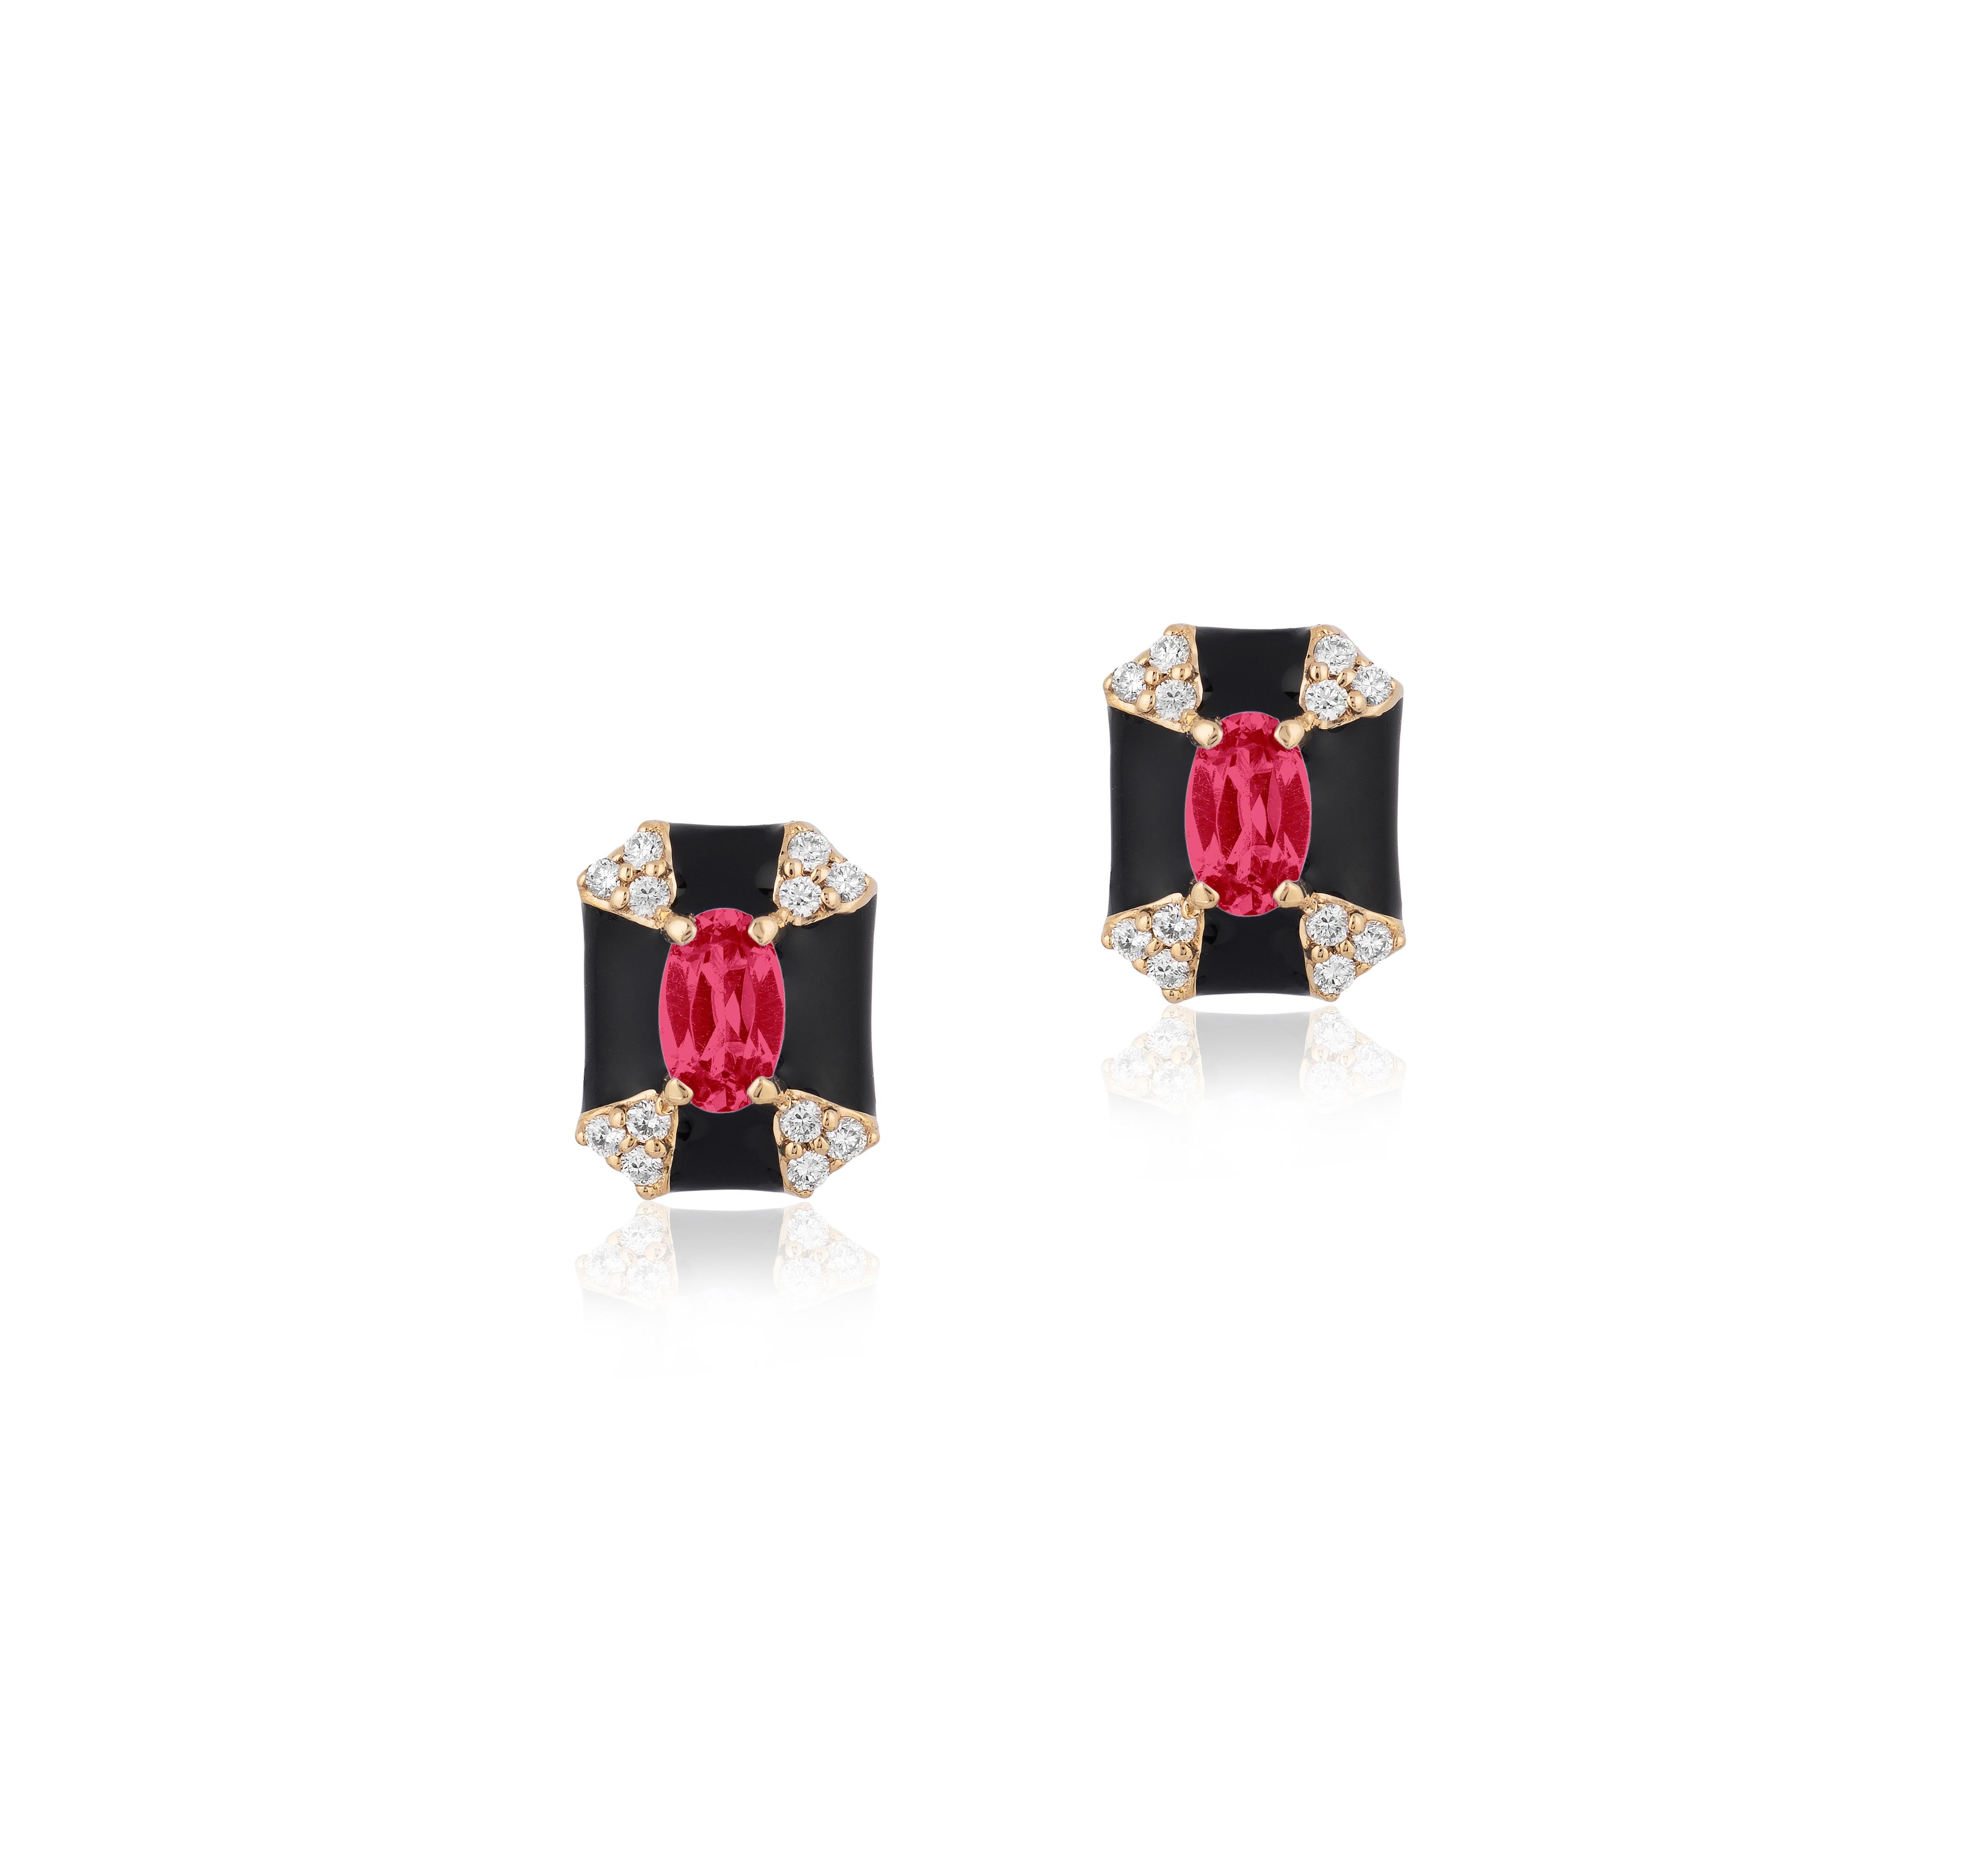 Queen' Octagon Black Enamel Stud Earrings with Ruby and Diamonds in 18K Yellow Gold.
Stone Size-5 x 3 mm 
Gemstone Approx Wt: Ruby- 0.68 Carats
Diamonds: G-H / VS; Approx. Wt: 0.14 Carats